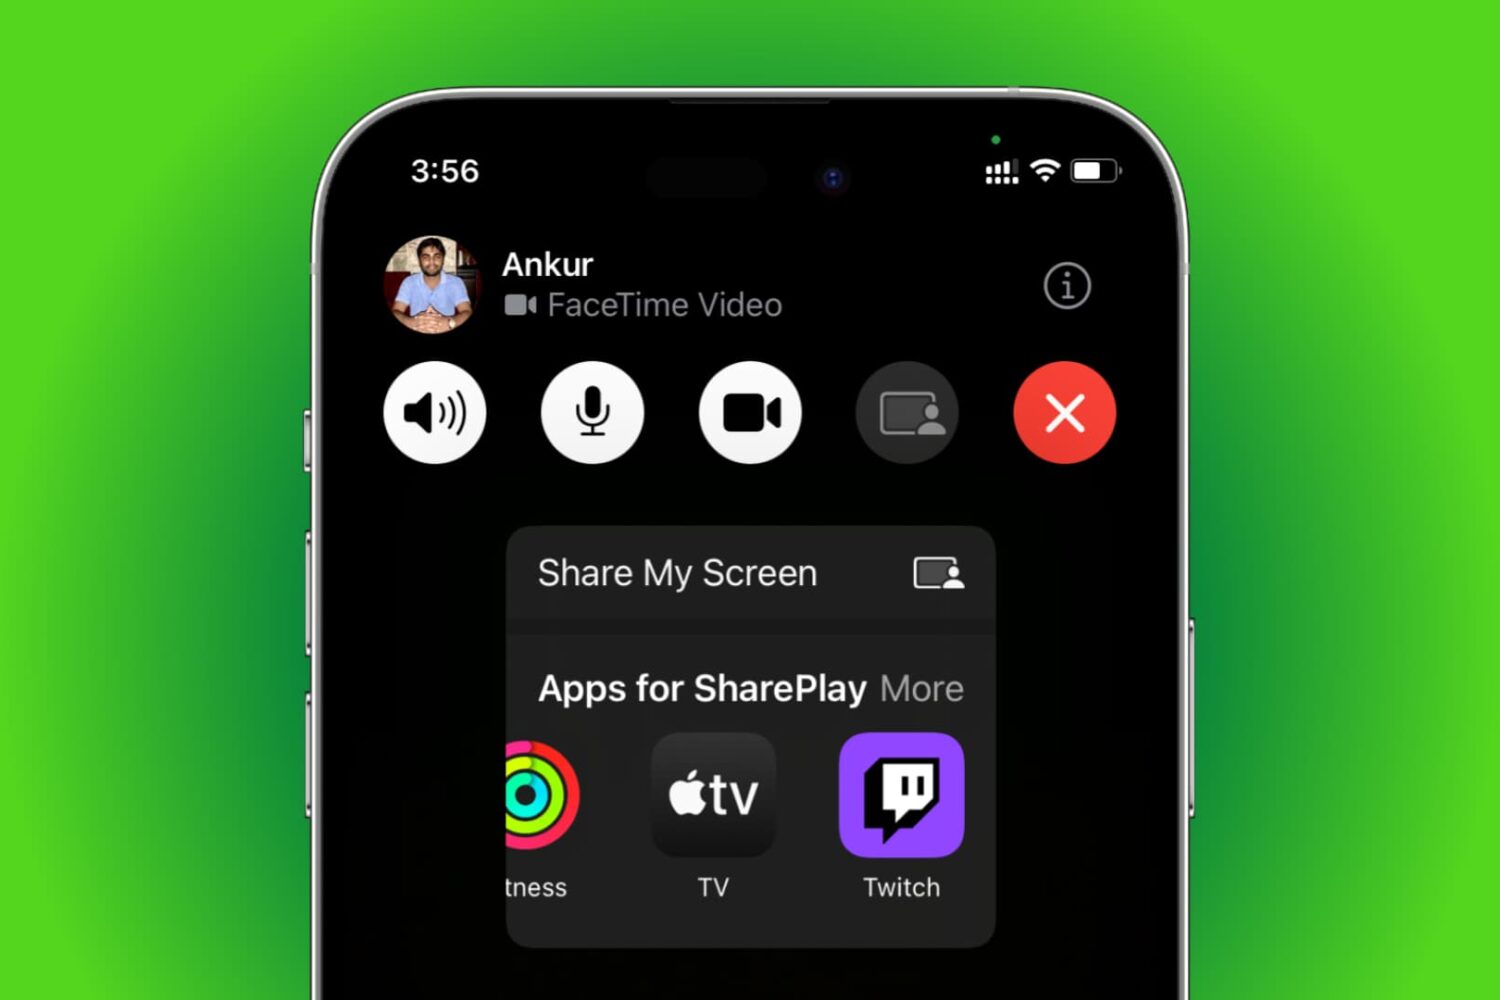 SharePlay in the FaceTime app on iPhone